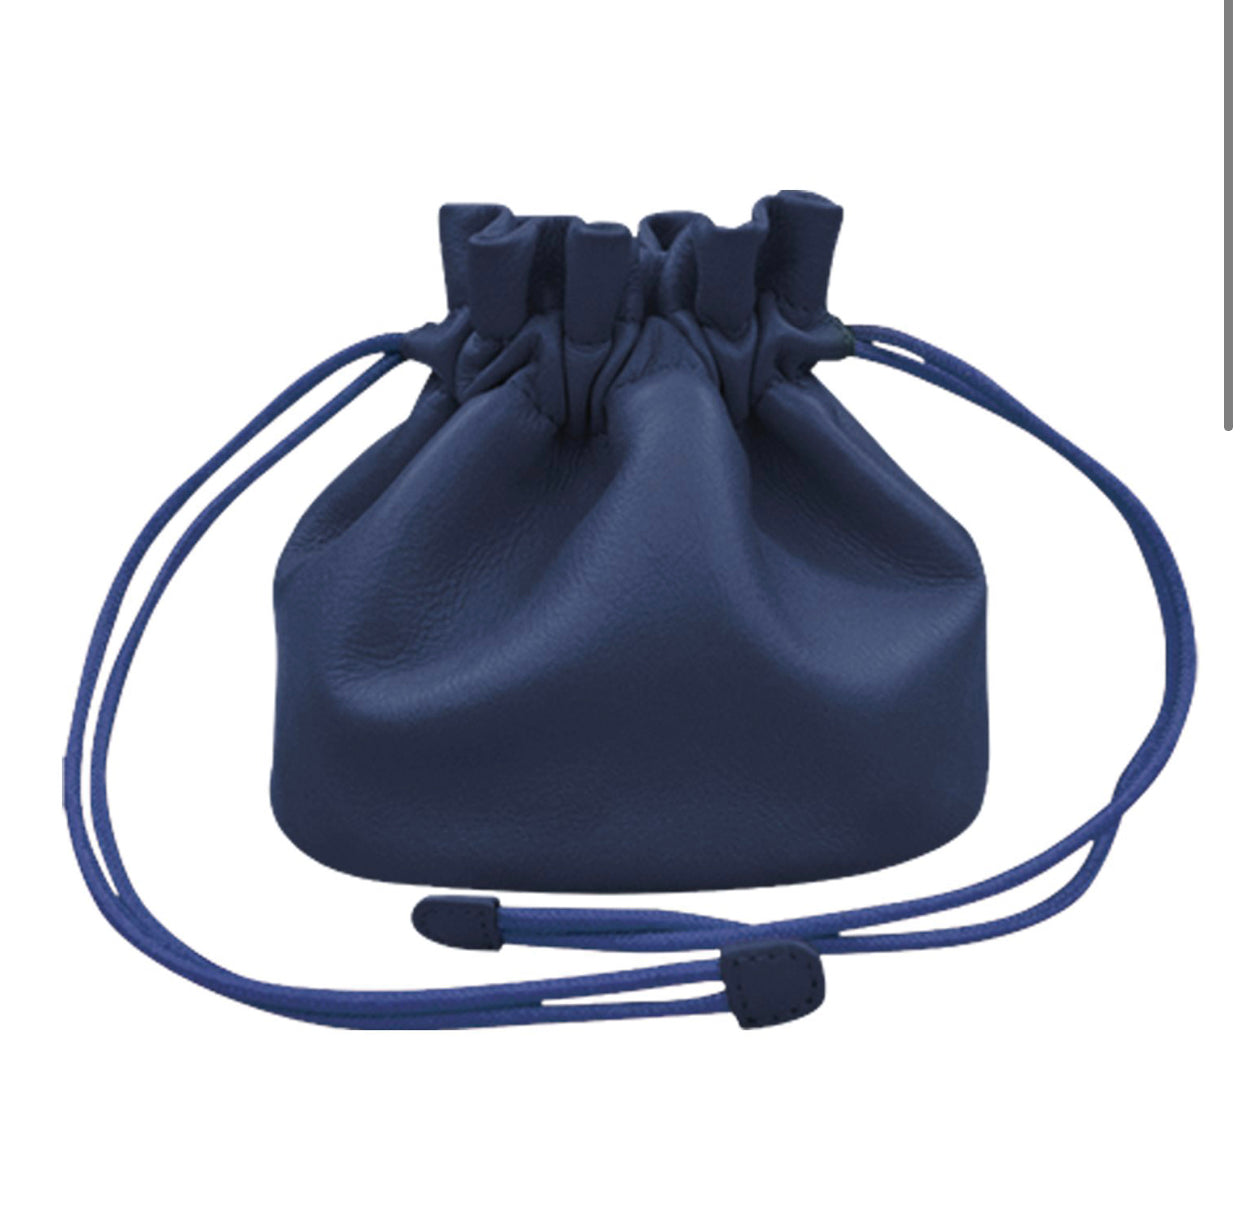 Flat Leather Drawstring Pouch - Tech Accessories, Makeup, Jewelry Holder, MicroSuede Lining - Navy Blue - Personalized Gifts, Leatherology